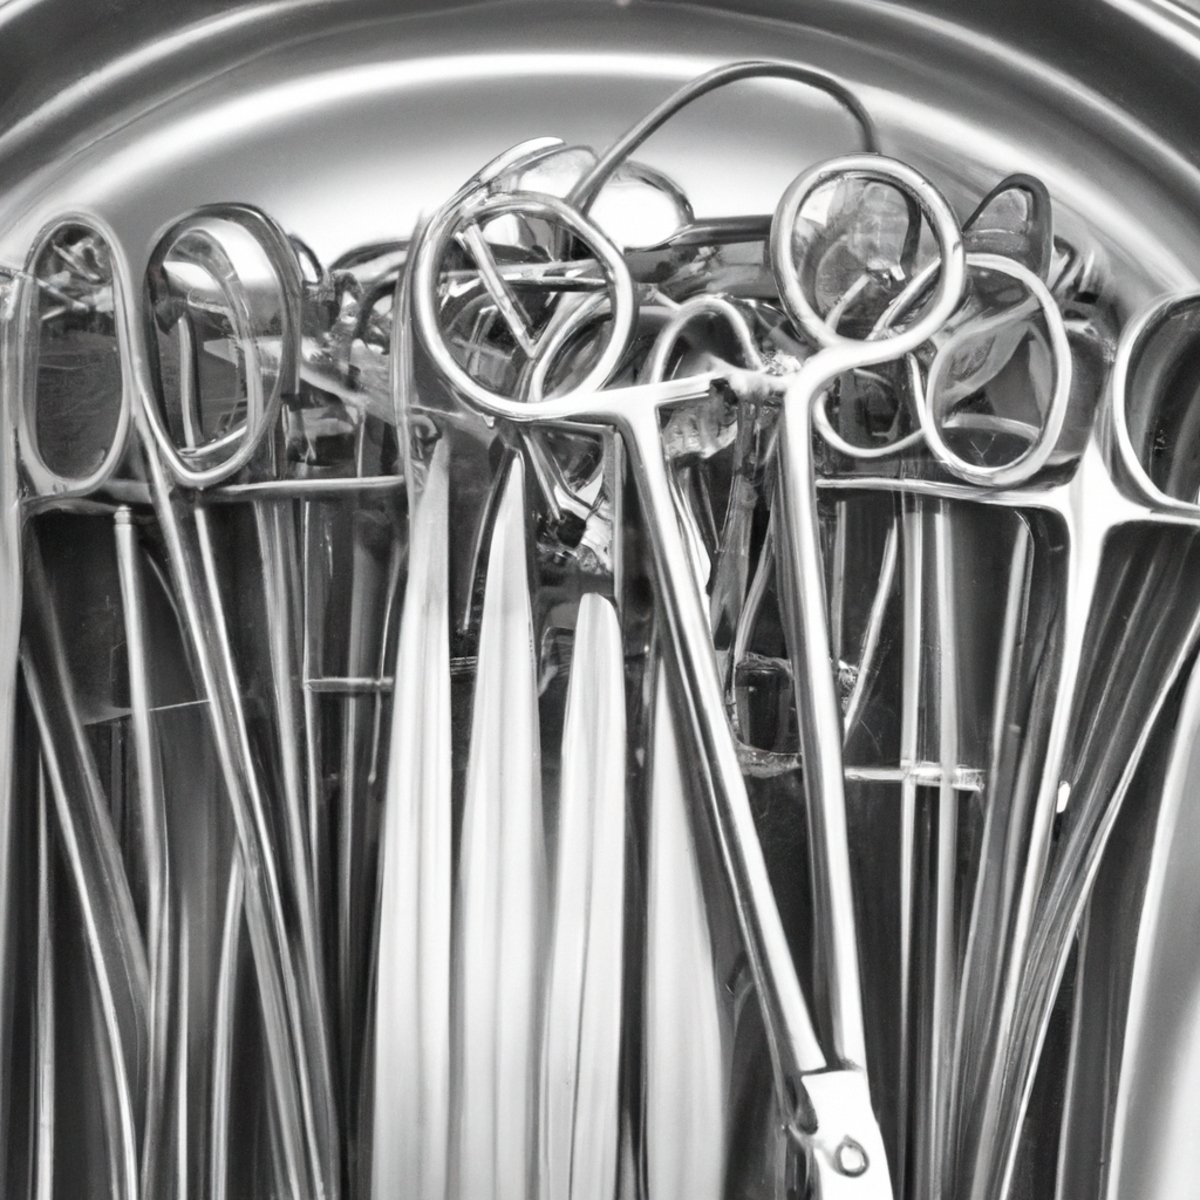 Sterile surgical tools, gleaming under bright lights, symbolize the precision and complexity of gallbladder surgeries - Gallbladder Neuroendocrine Tumor